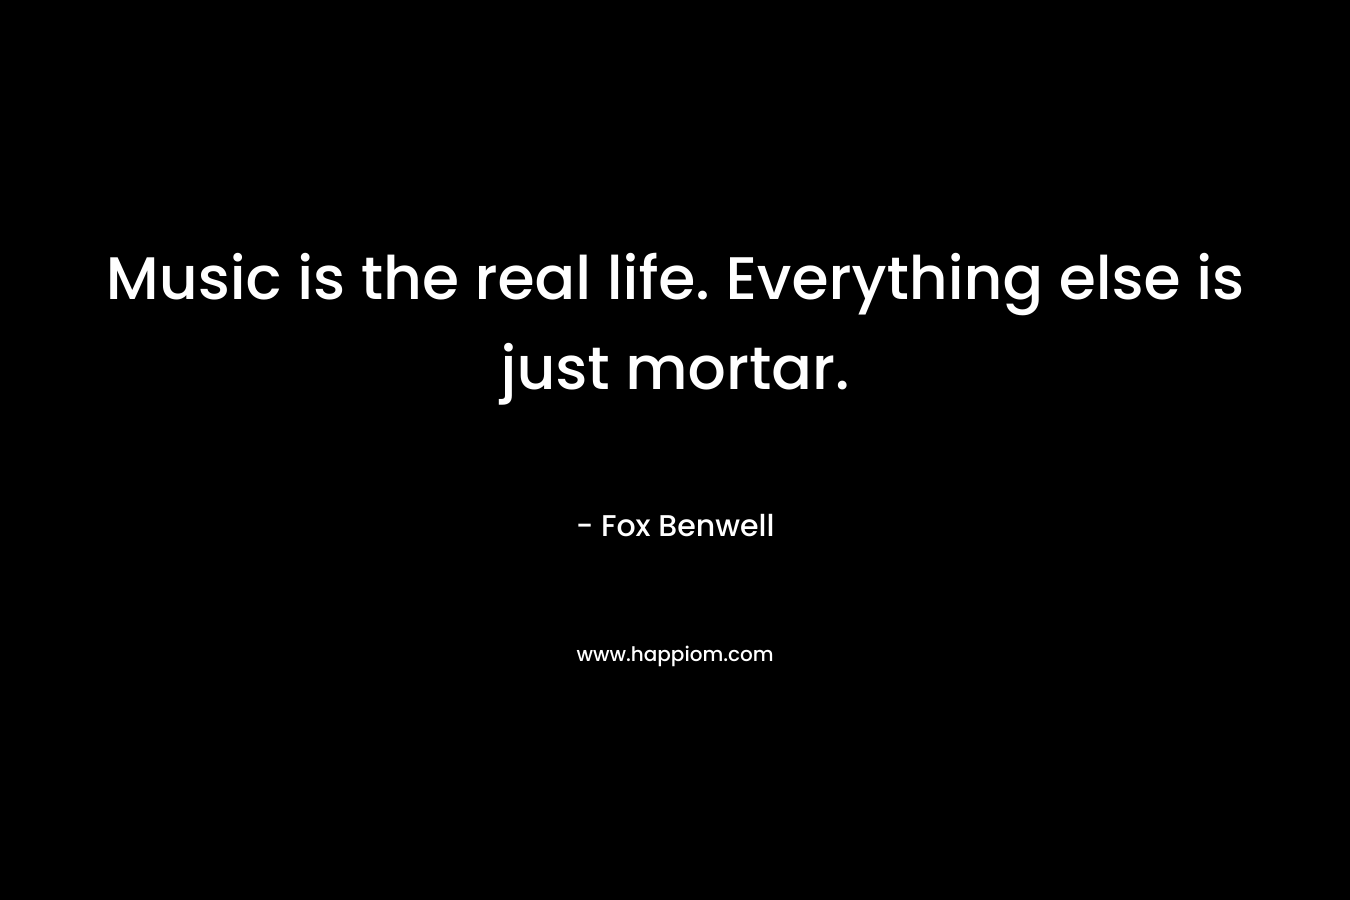 Music is the real life. Everything else is just mortar.